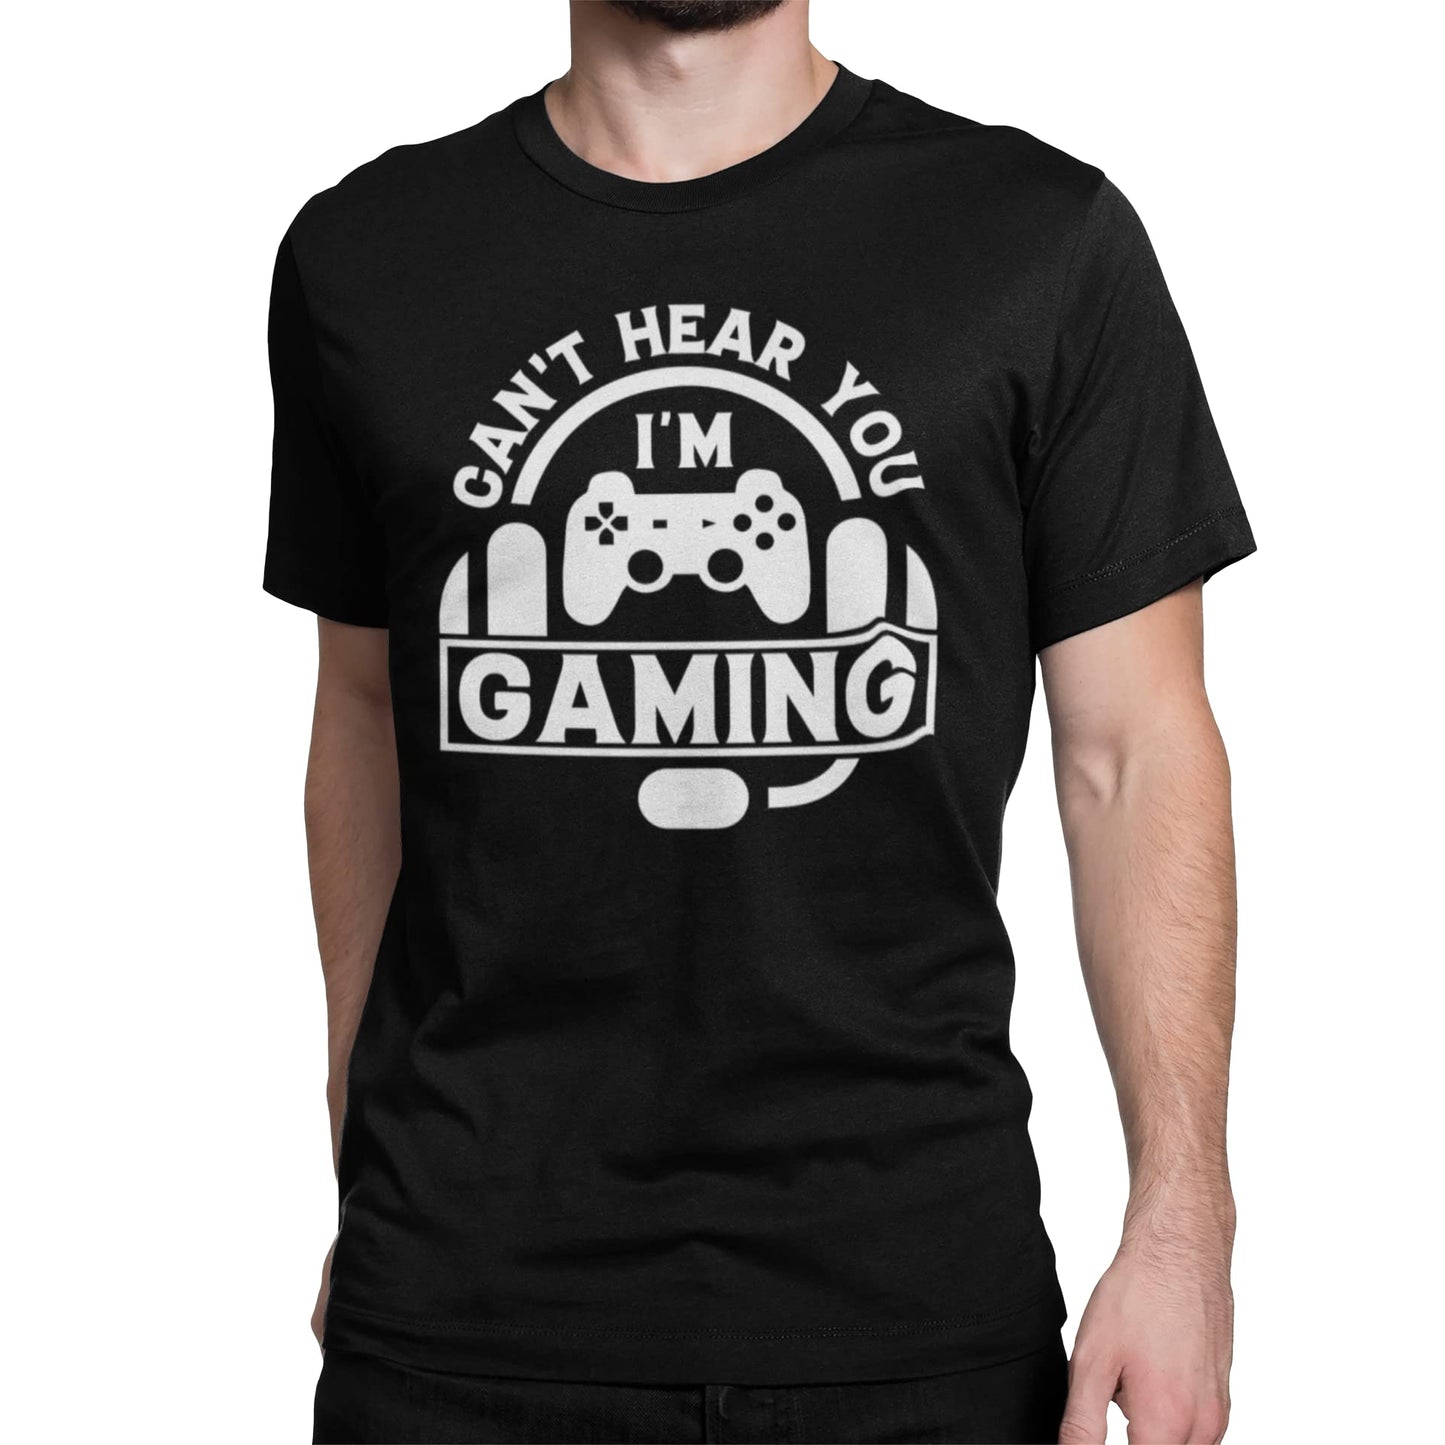 BROOKLYN VERTICAL Can't Hear You I'm Gaming | Funny Video Gamer Gaming Life Short Sleeve Crew Neck T-Shirt